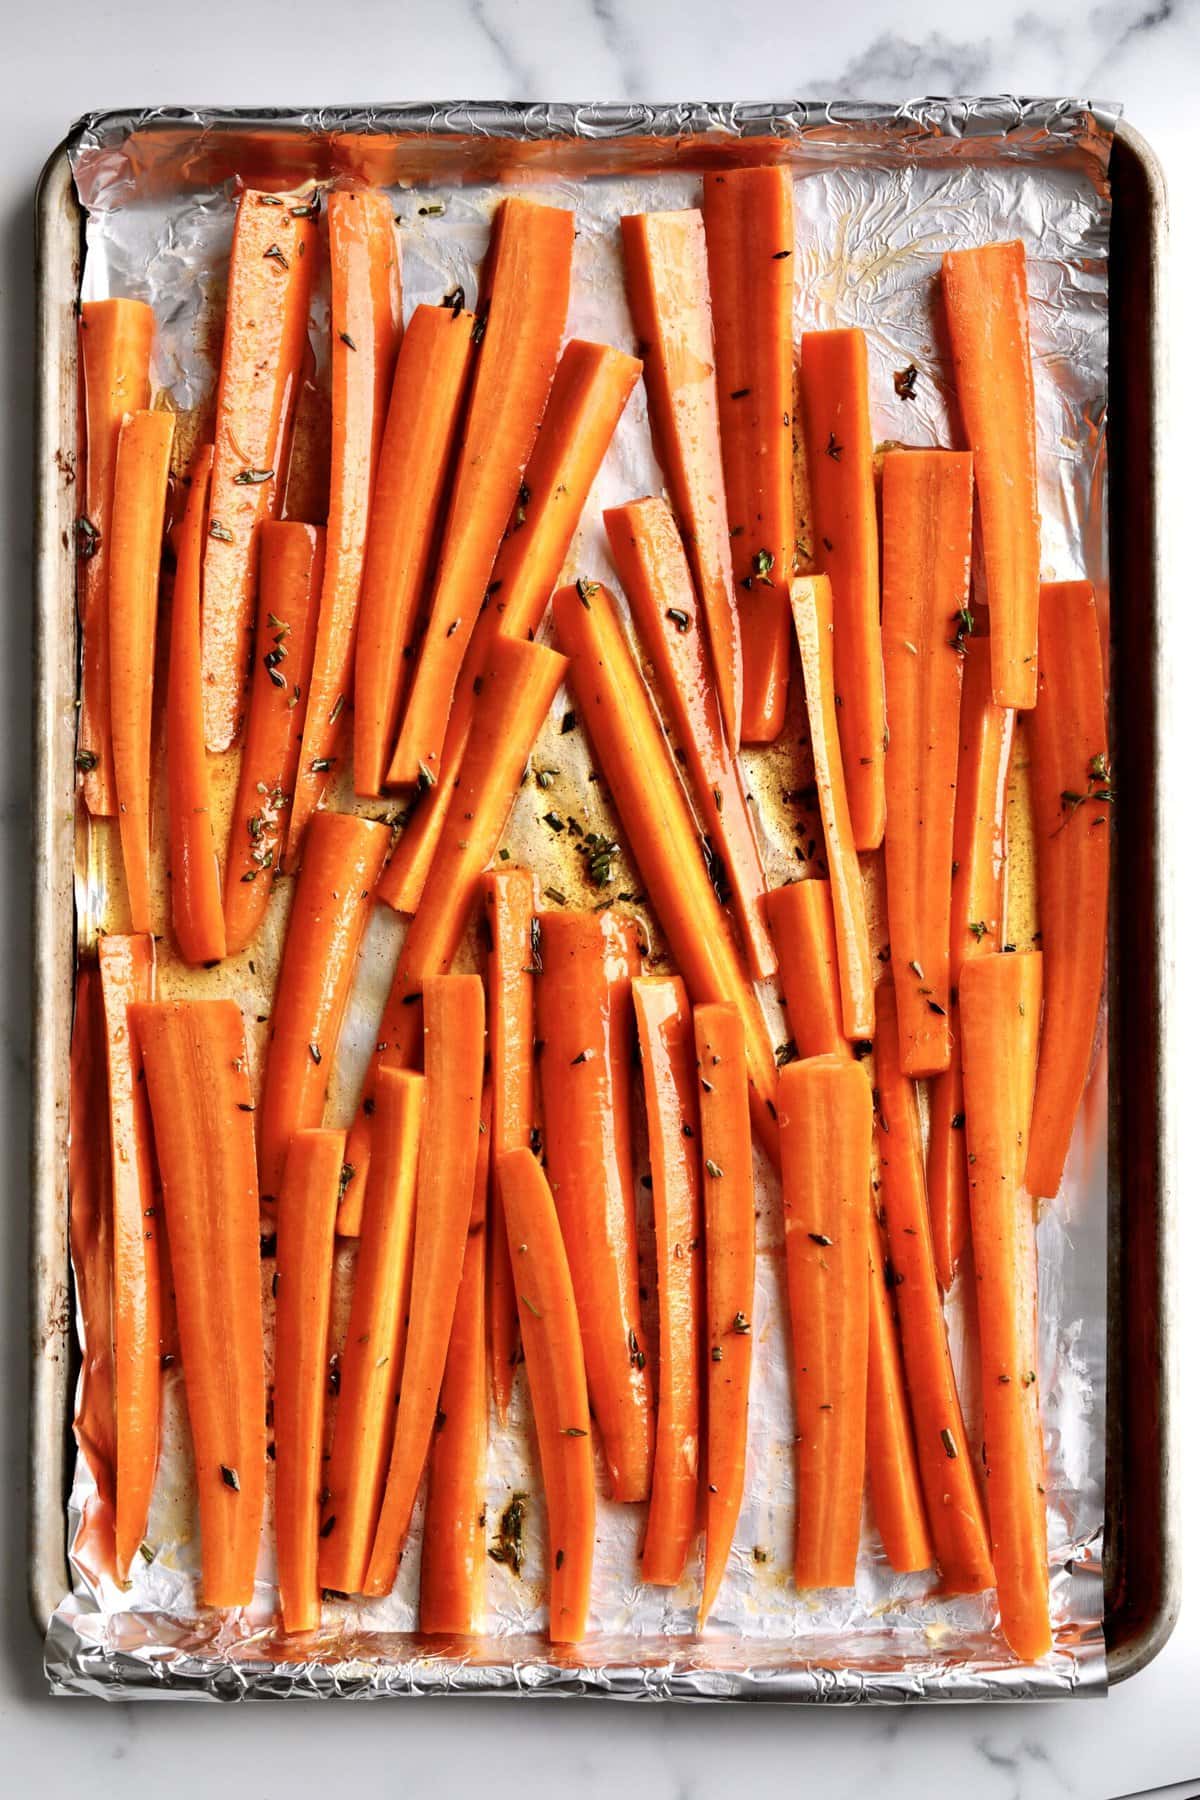 How to makeBest Honey Glazed Carrots Recipe (Oven Roasted)- carrots tossed in glaze and ready to bake.